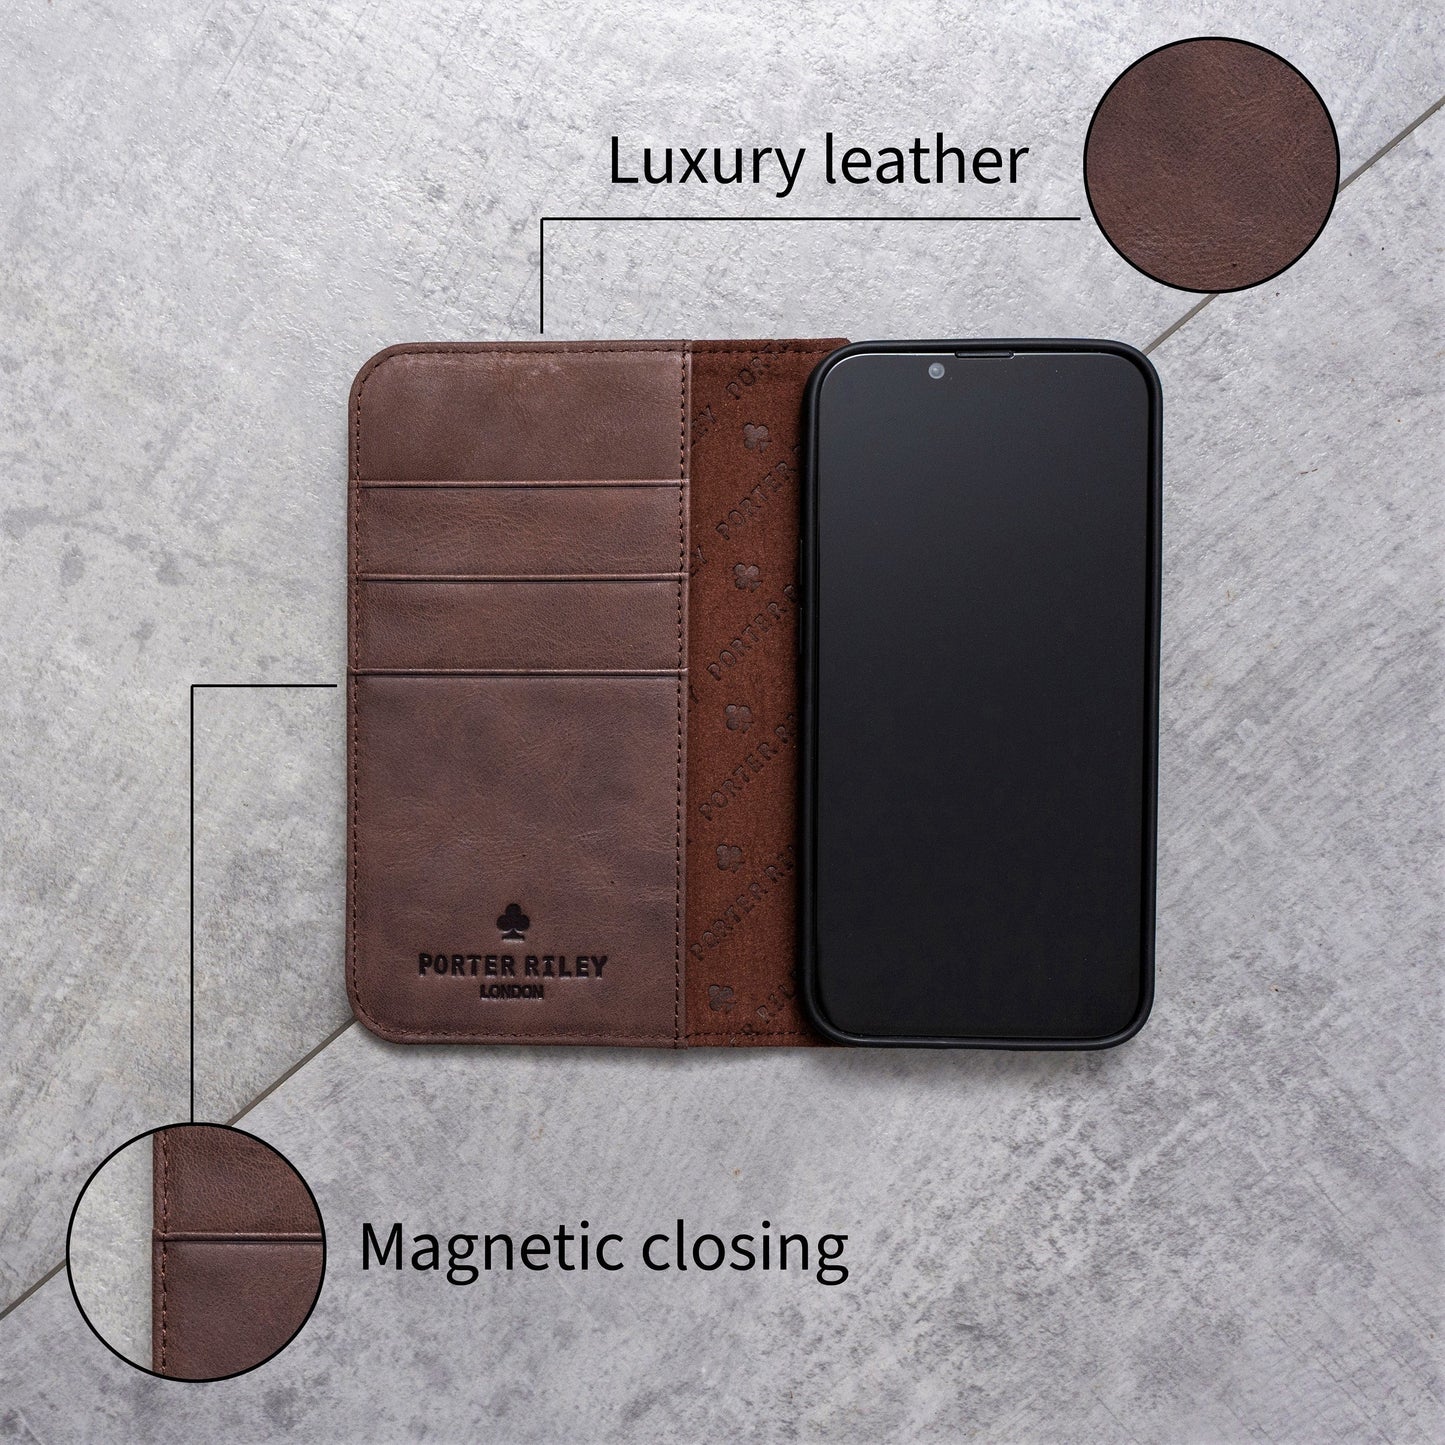 Huawei Mate 10 Pro Leather Case. Premium Slim Genuine Leather Stand Case/Cover/Wallet (Chocolate Brown)